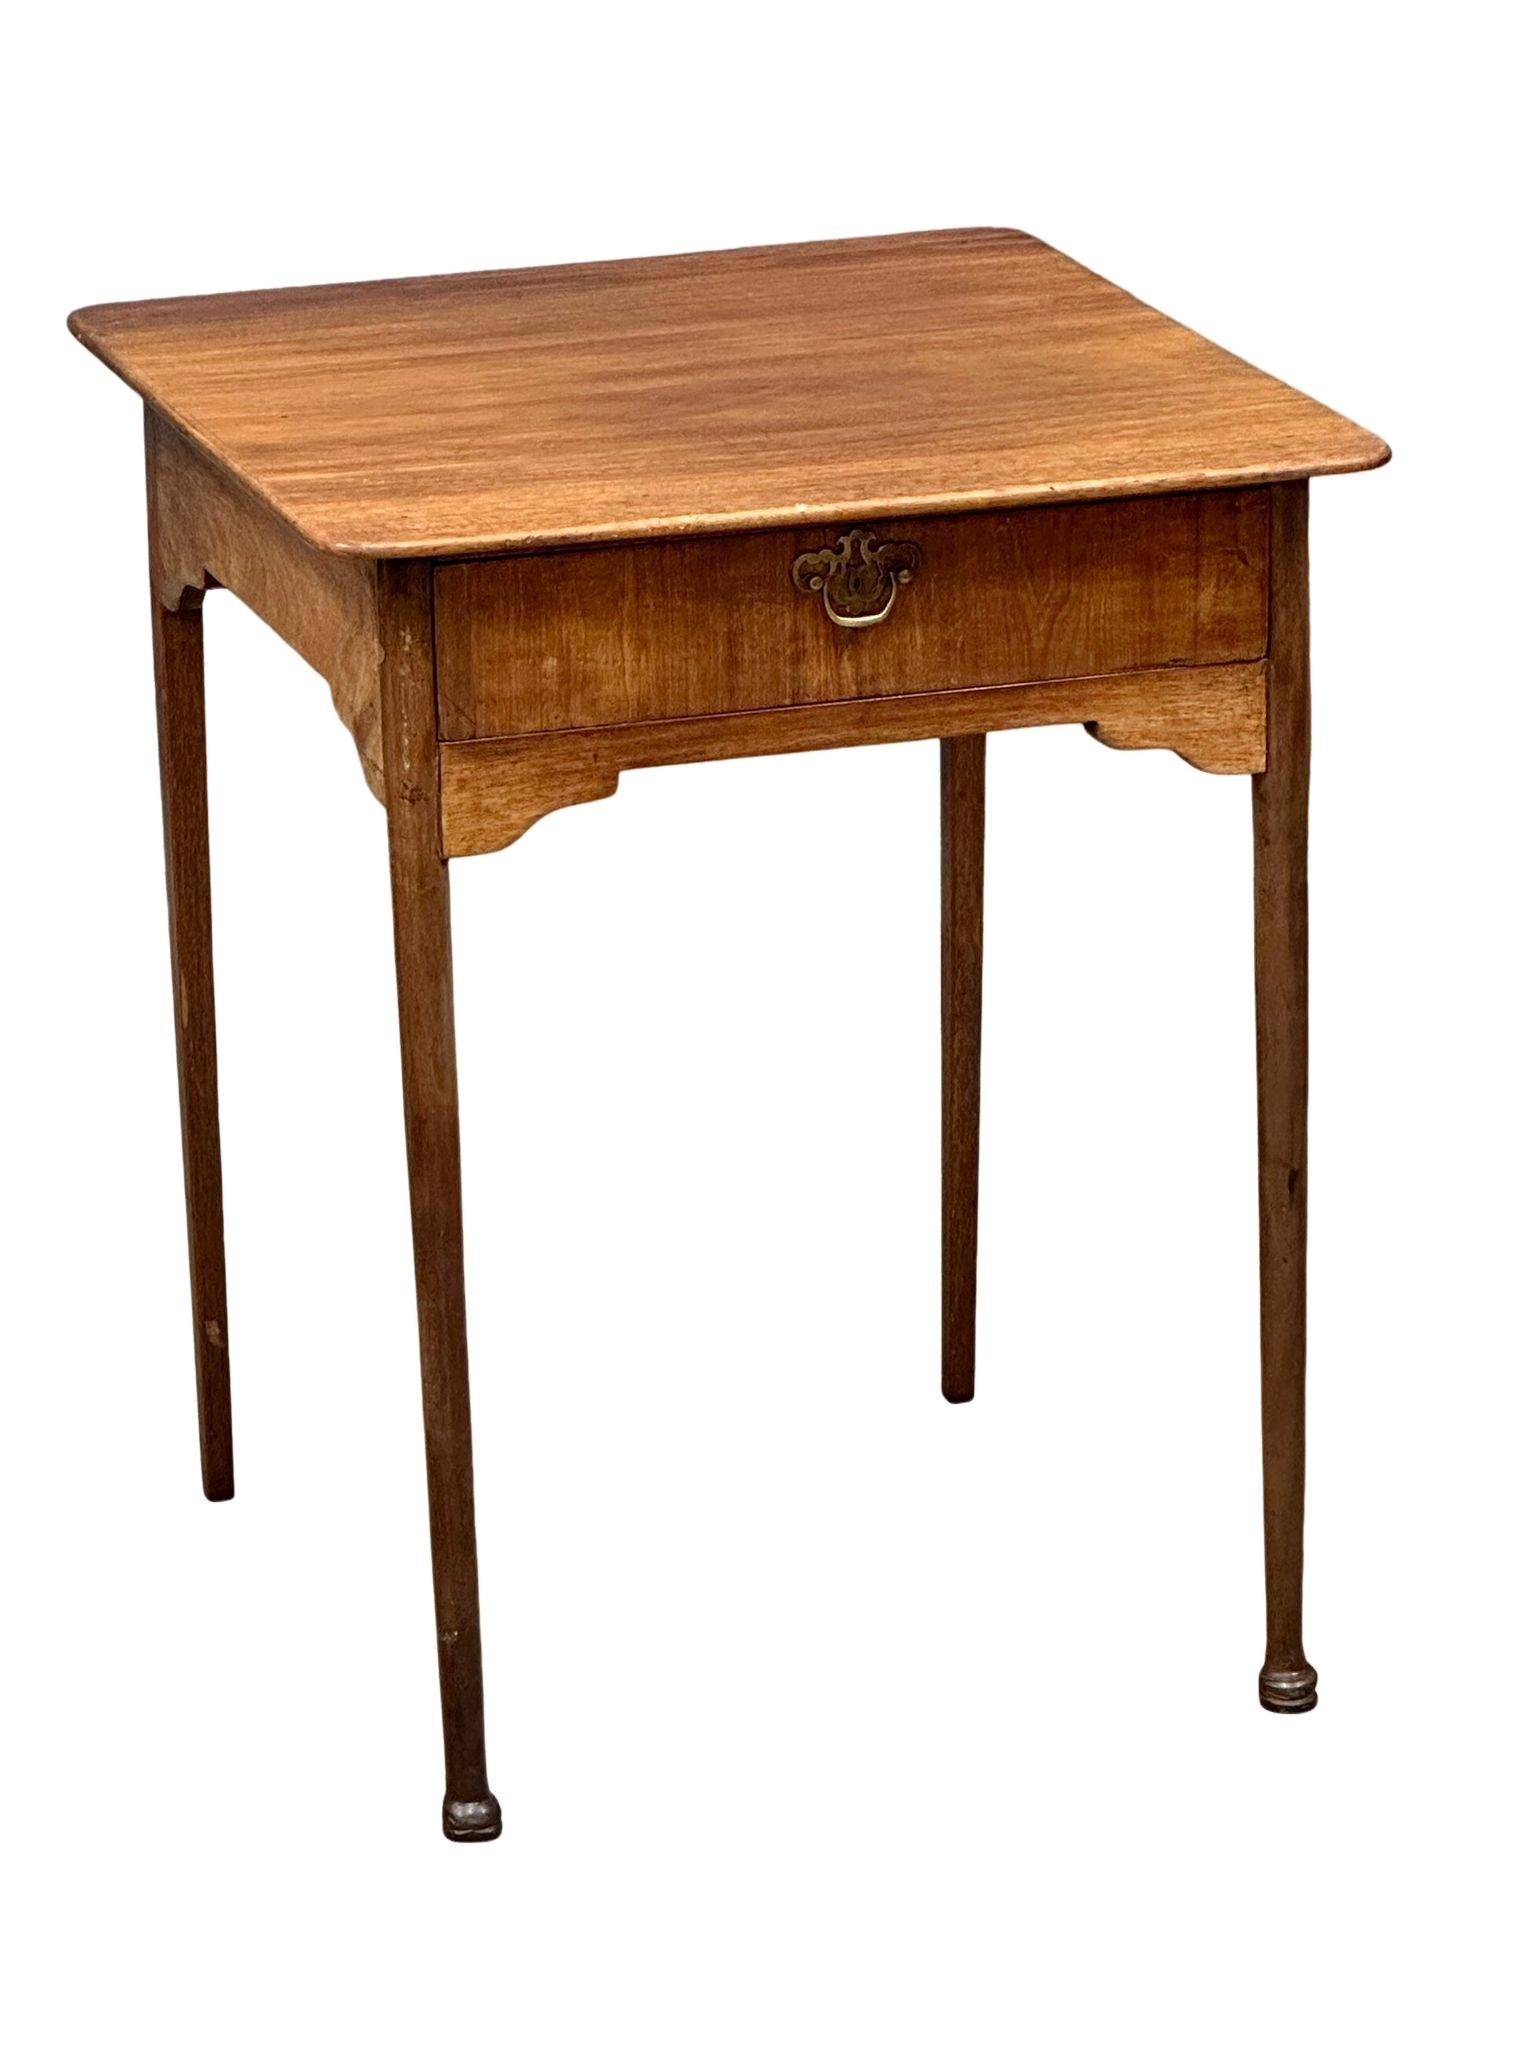 A late George III mahogany side table with drawer, circa 1800-20. 58cm x 57.5cm x 72cm